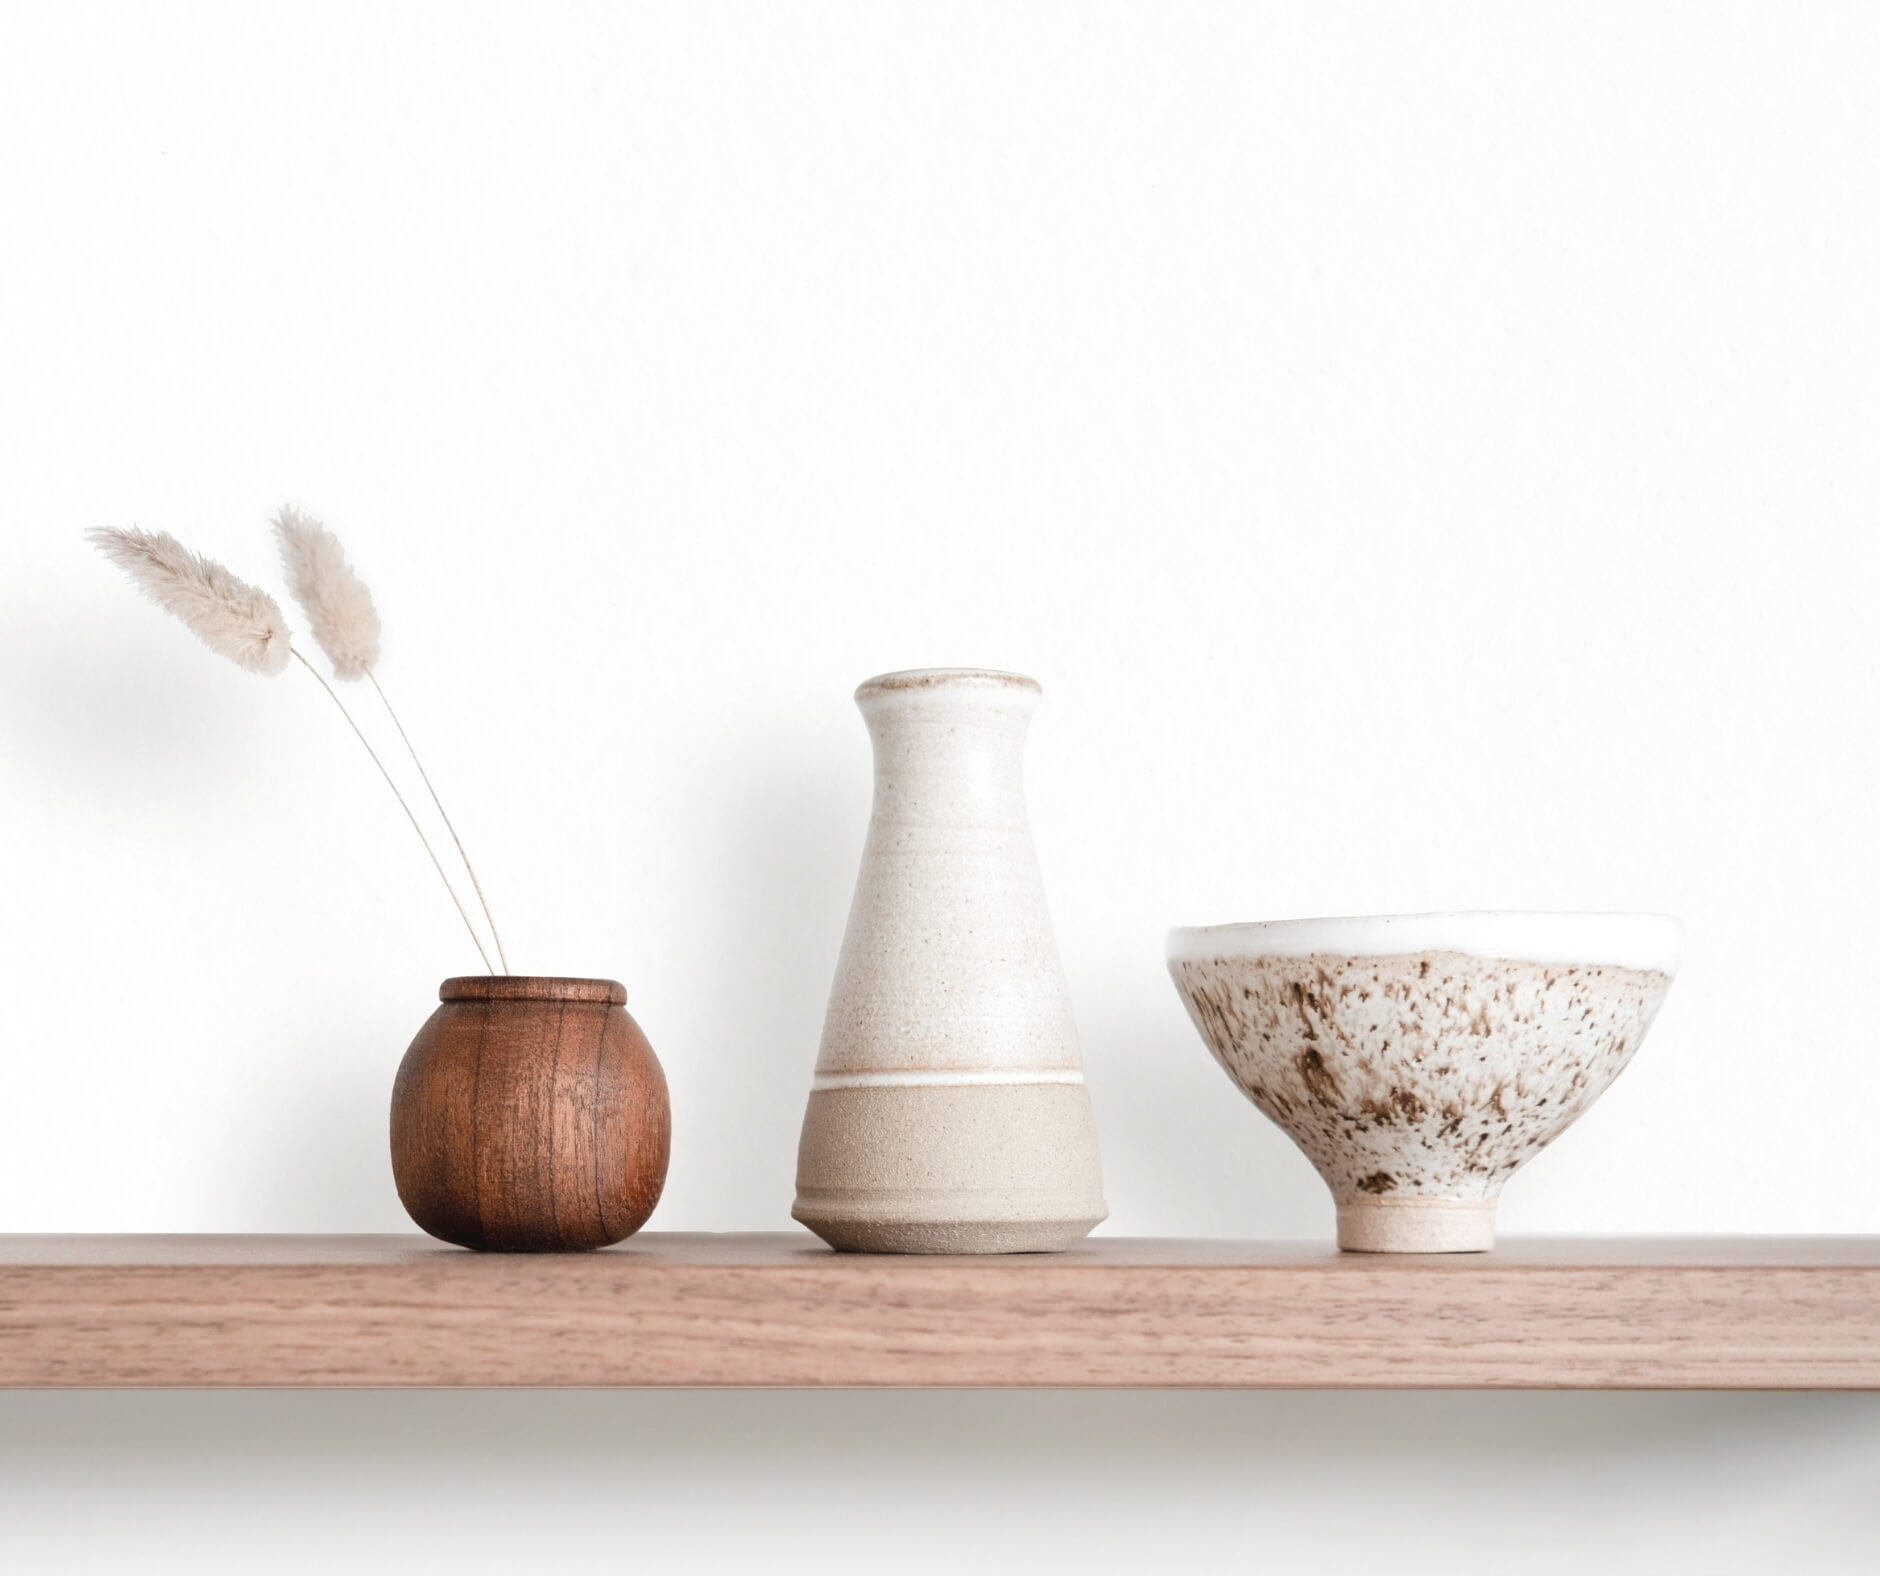 Three ceramic vessels by Studio Anansi on a wooden shelf against a white wall, with dried grasses in the smallest one.